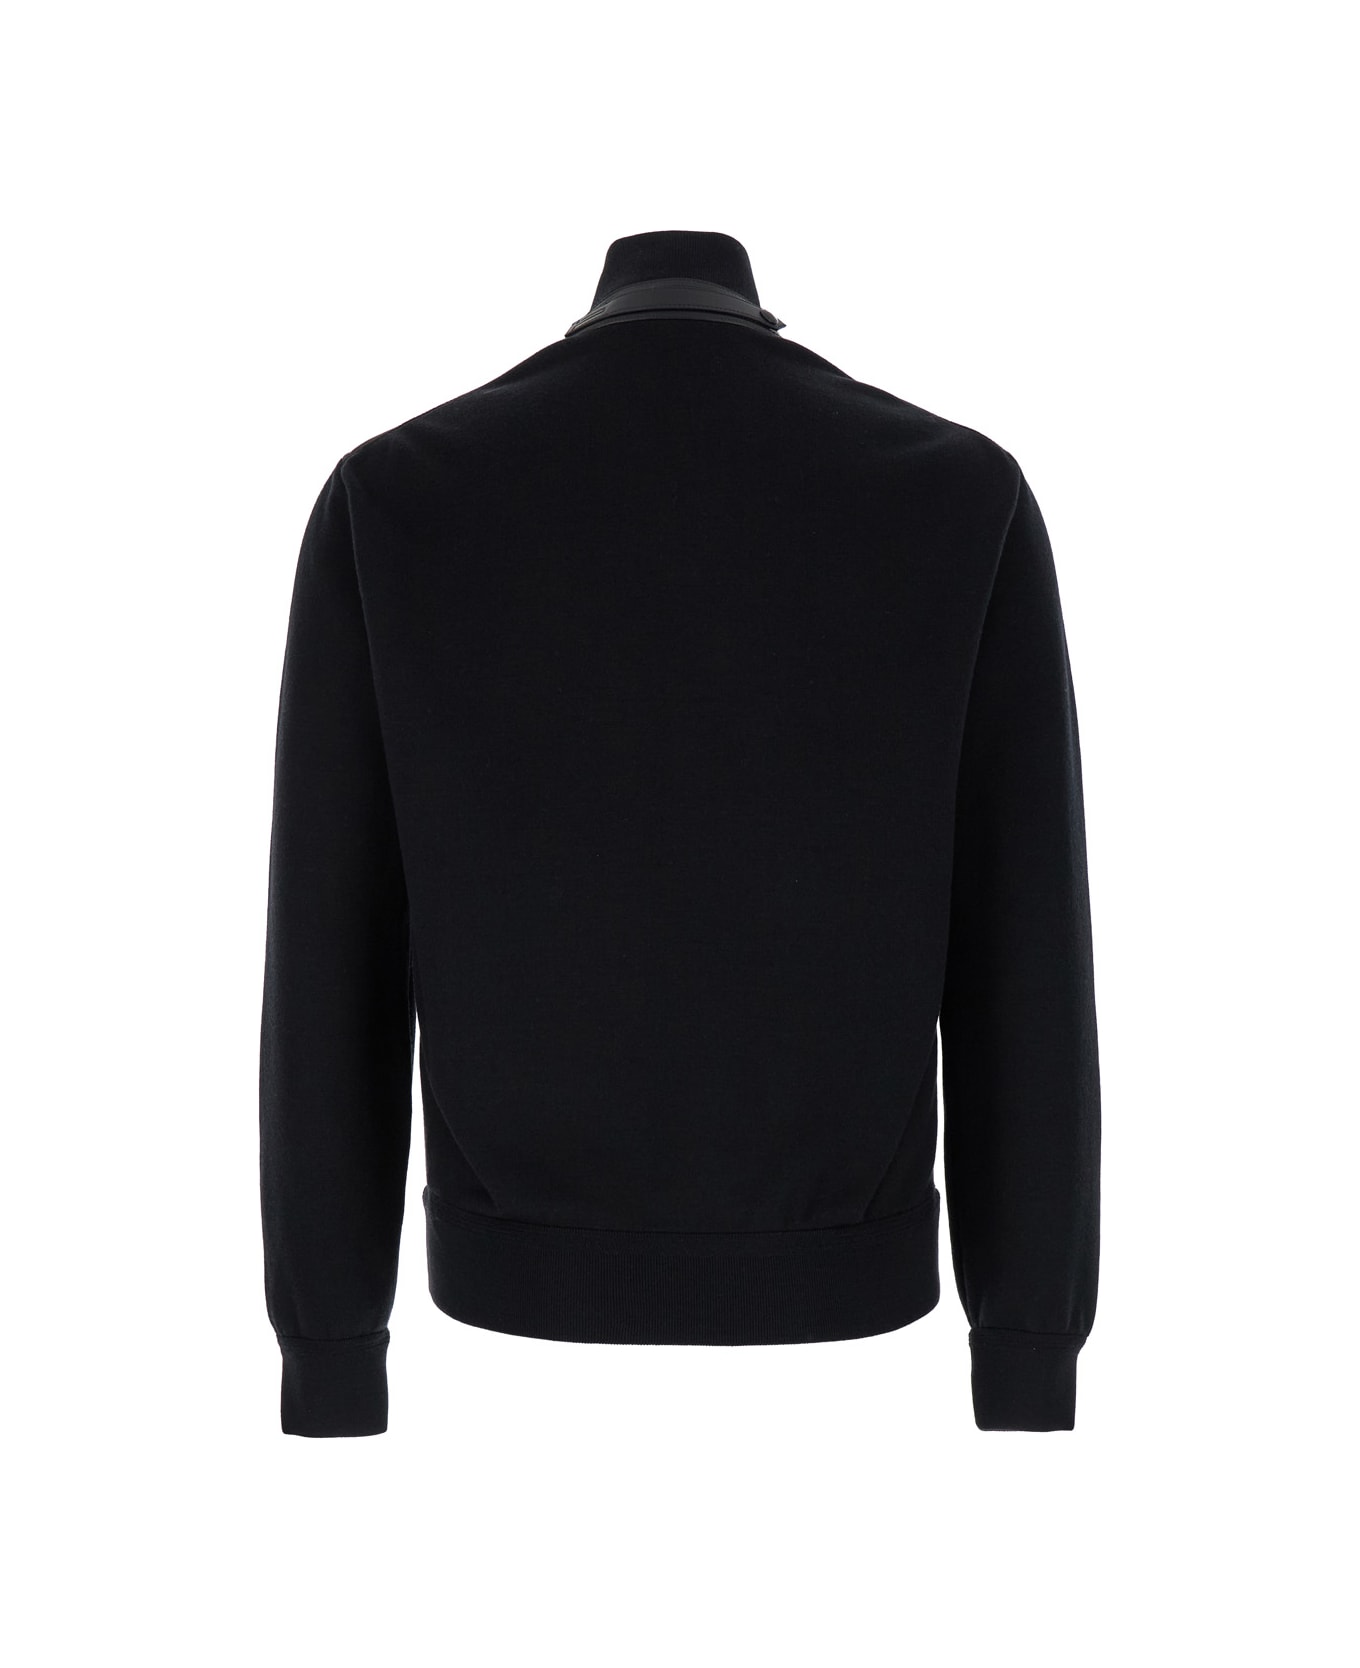 Tom Ford Black Jacket With High Neck And Zip In Knit And Nylon Man - Black